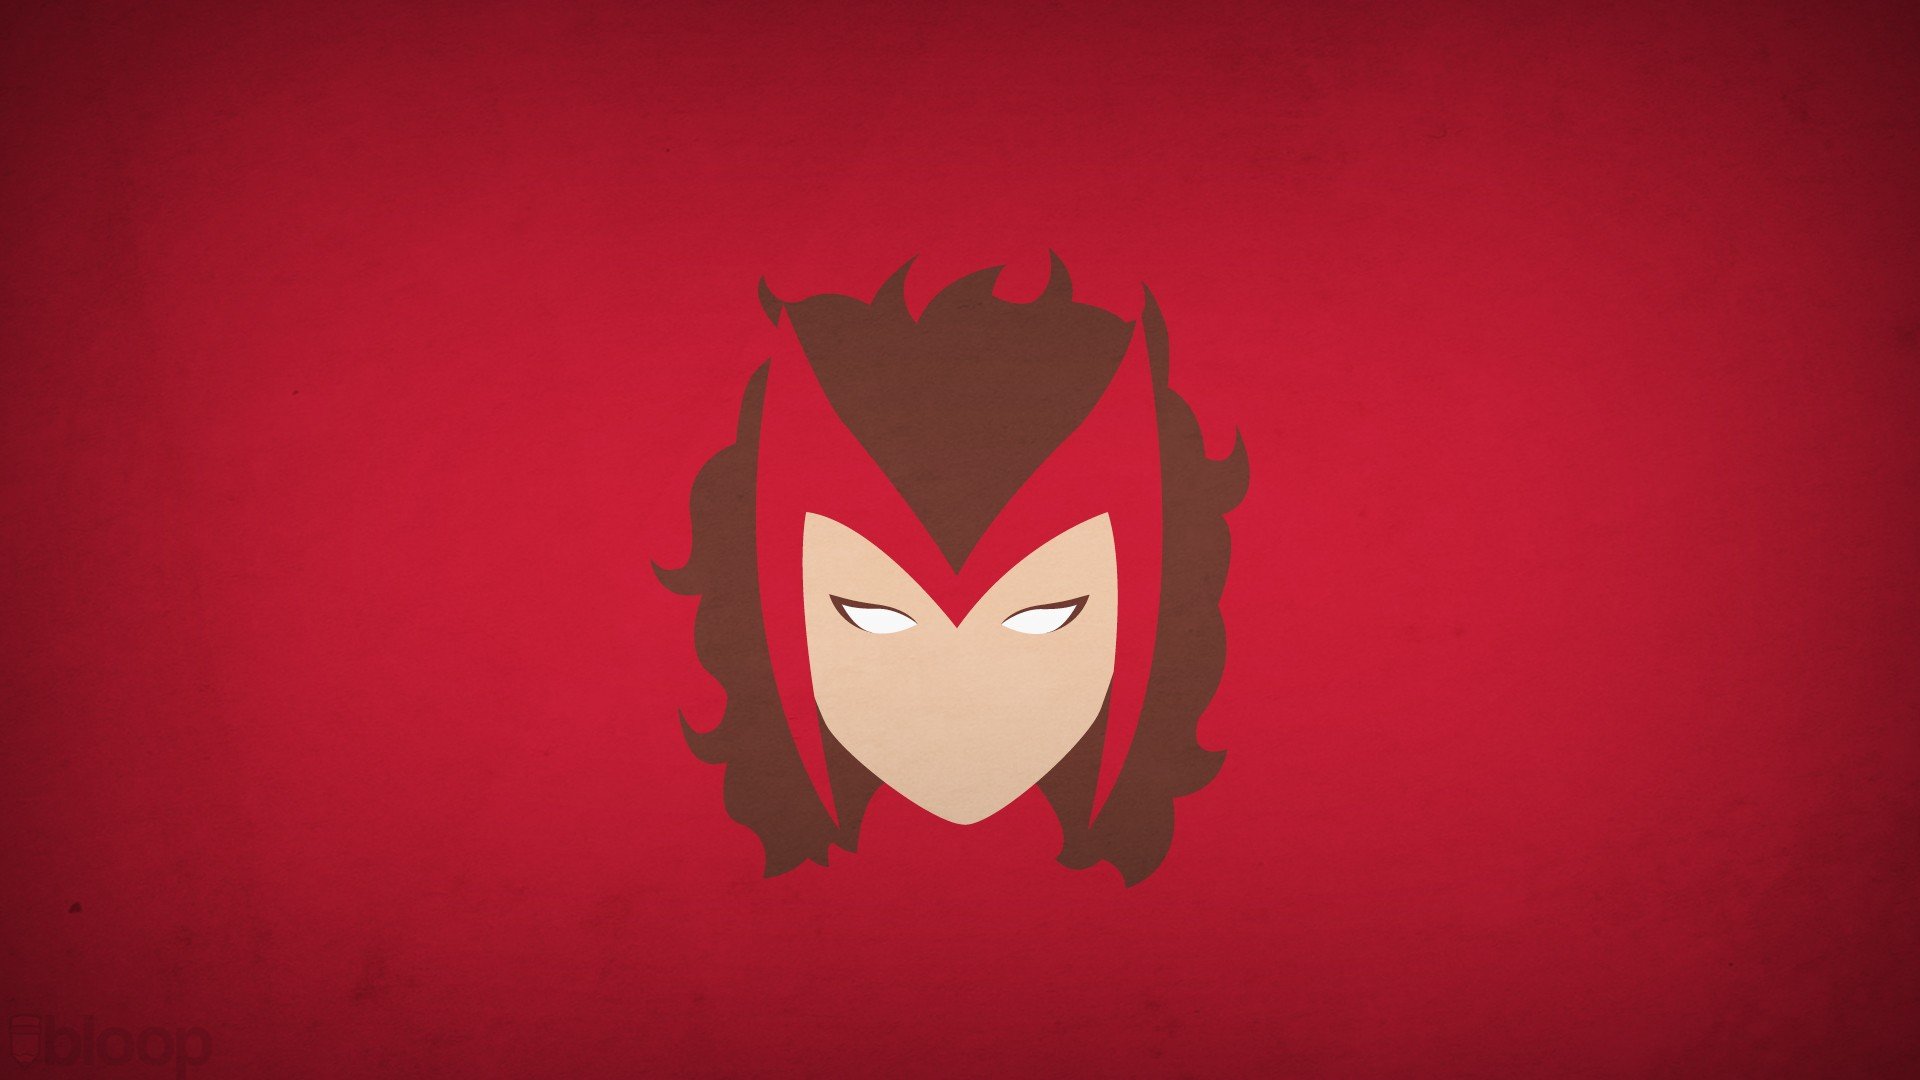  superheroes Marvel Comics Scarlet Witch red background blo0p wallpaper